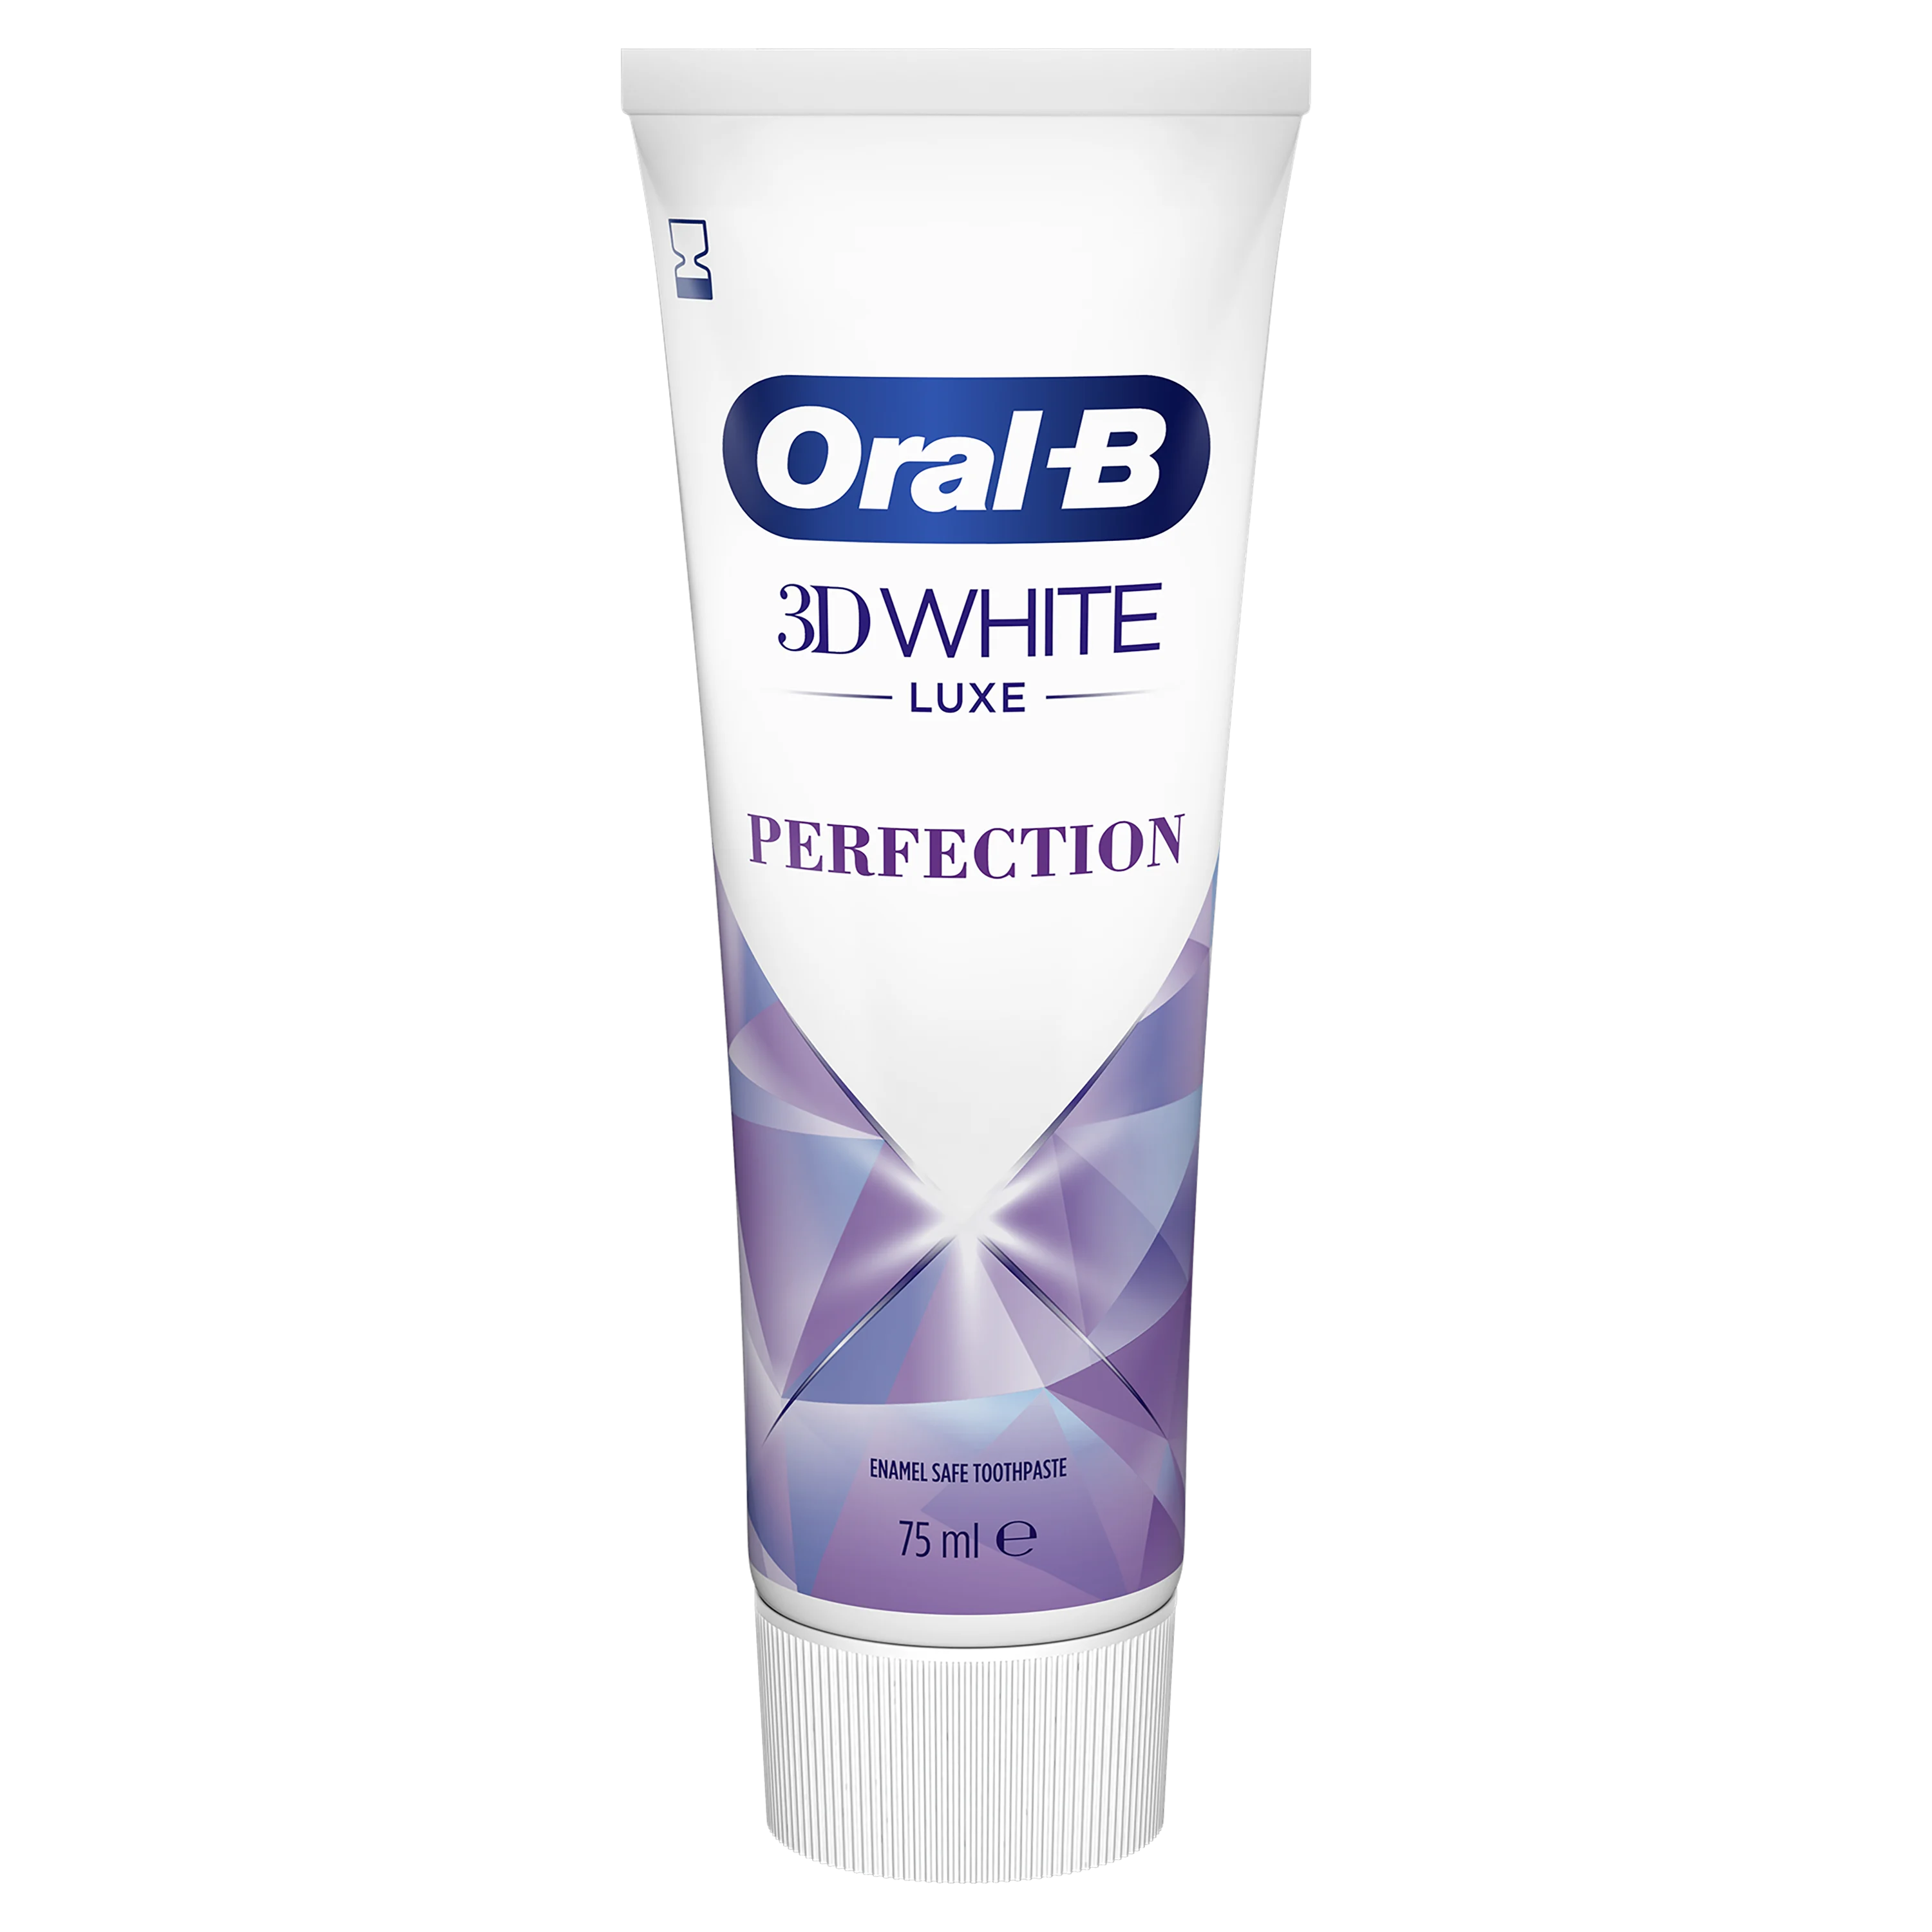 Oral-B 3D White Perfection Toothpaste | UK